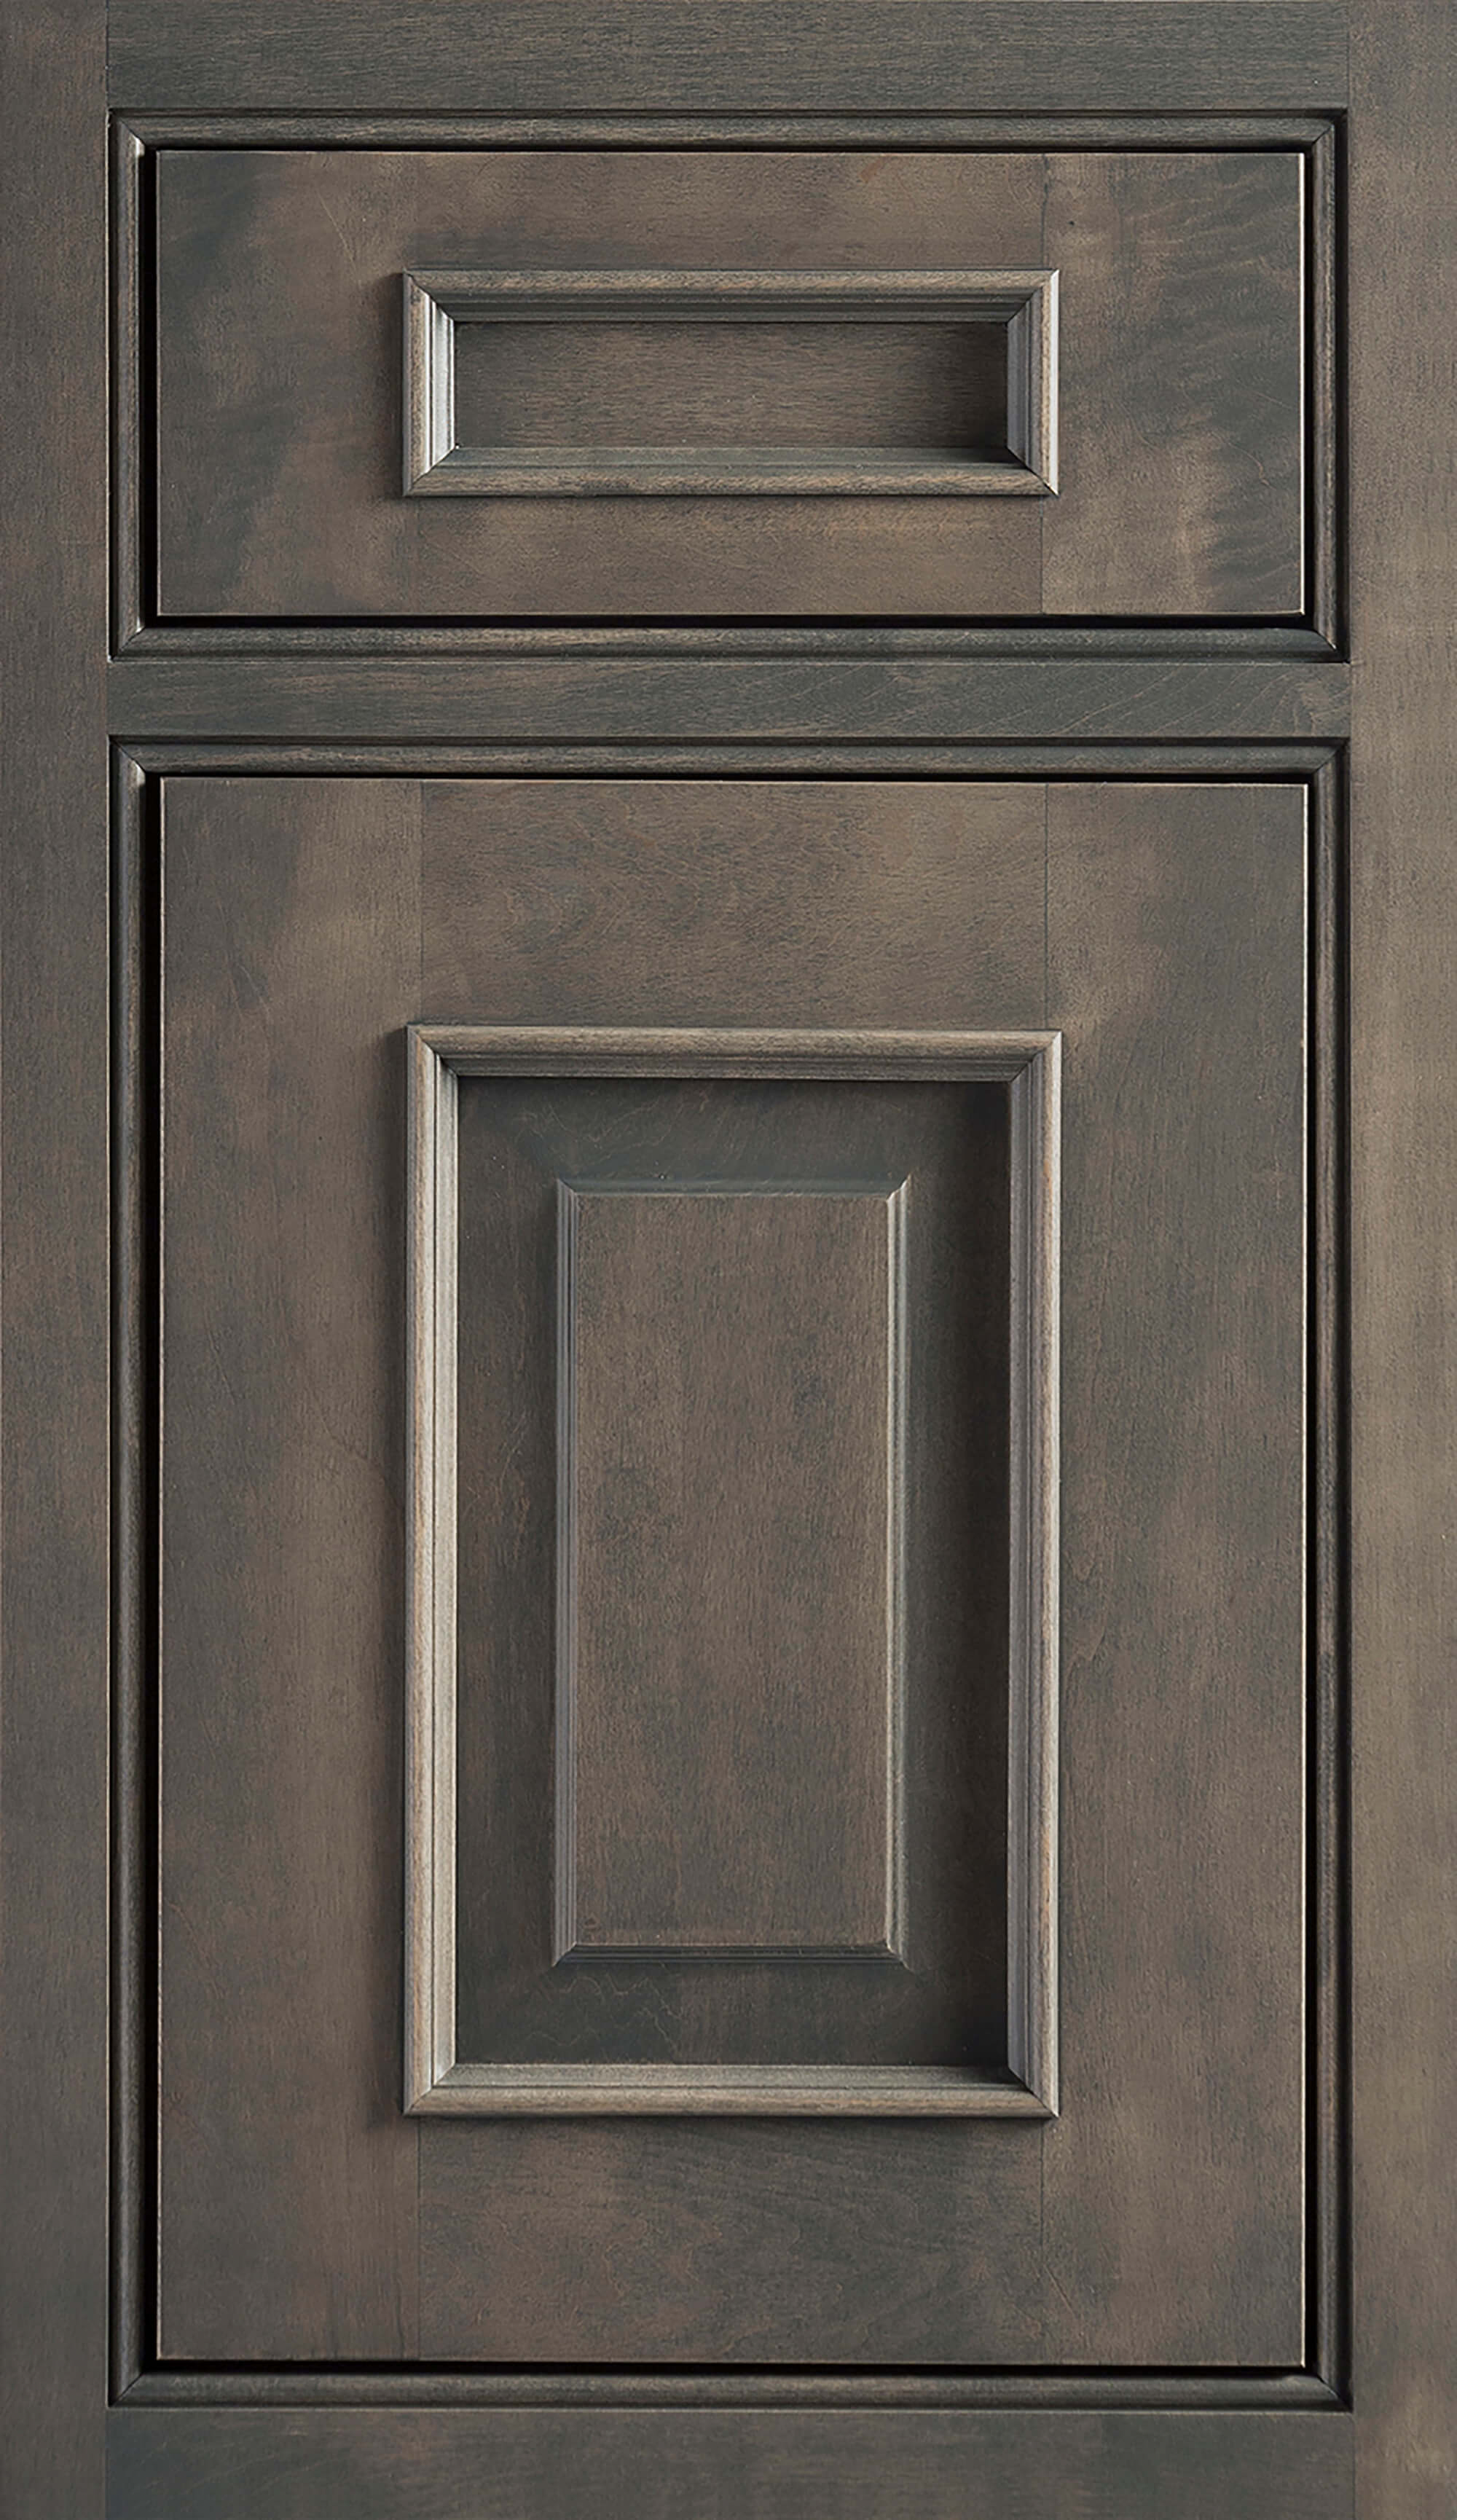 Dura Supreme Cabinetry, Inset Styling on the Montego-Inset door style with Beaded Face Frame, one Barrel, and one Concealed Hinging